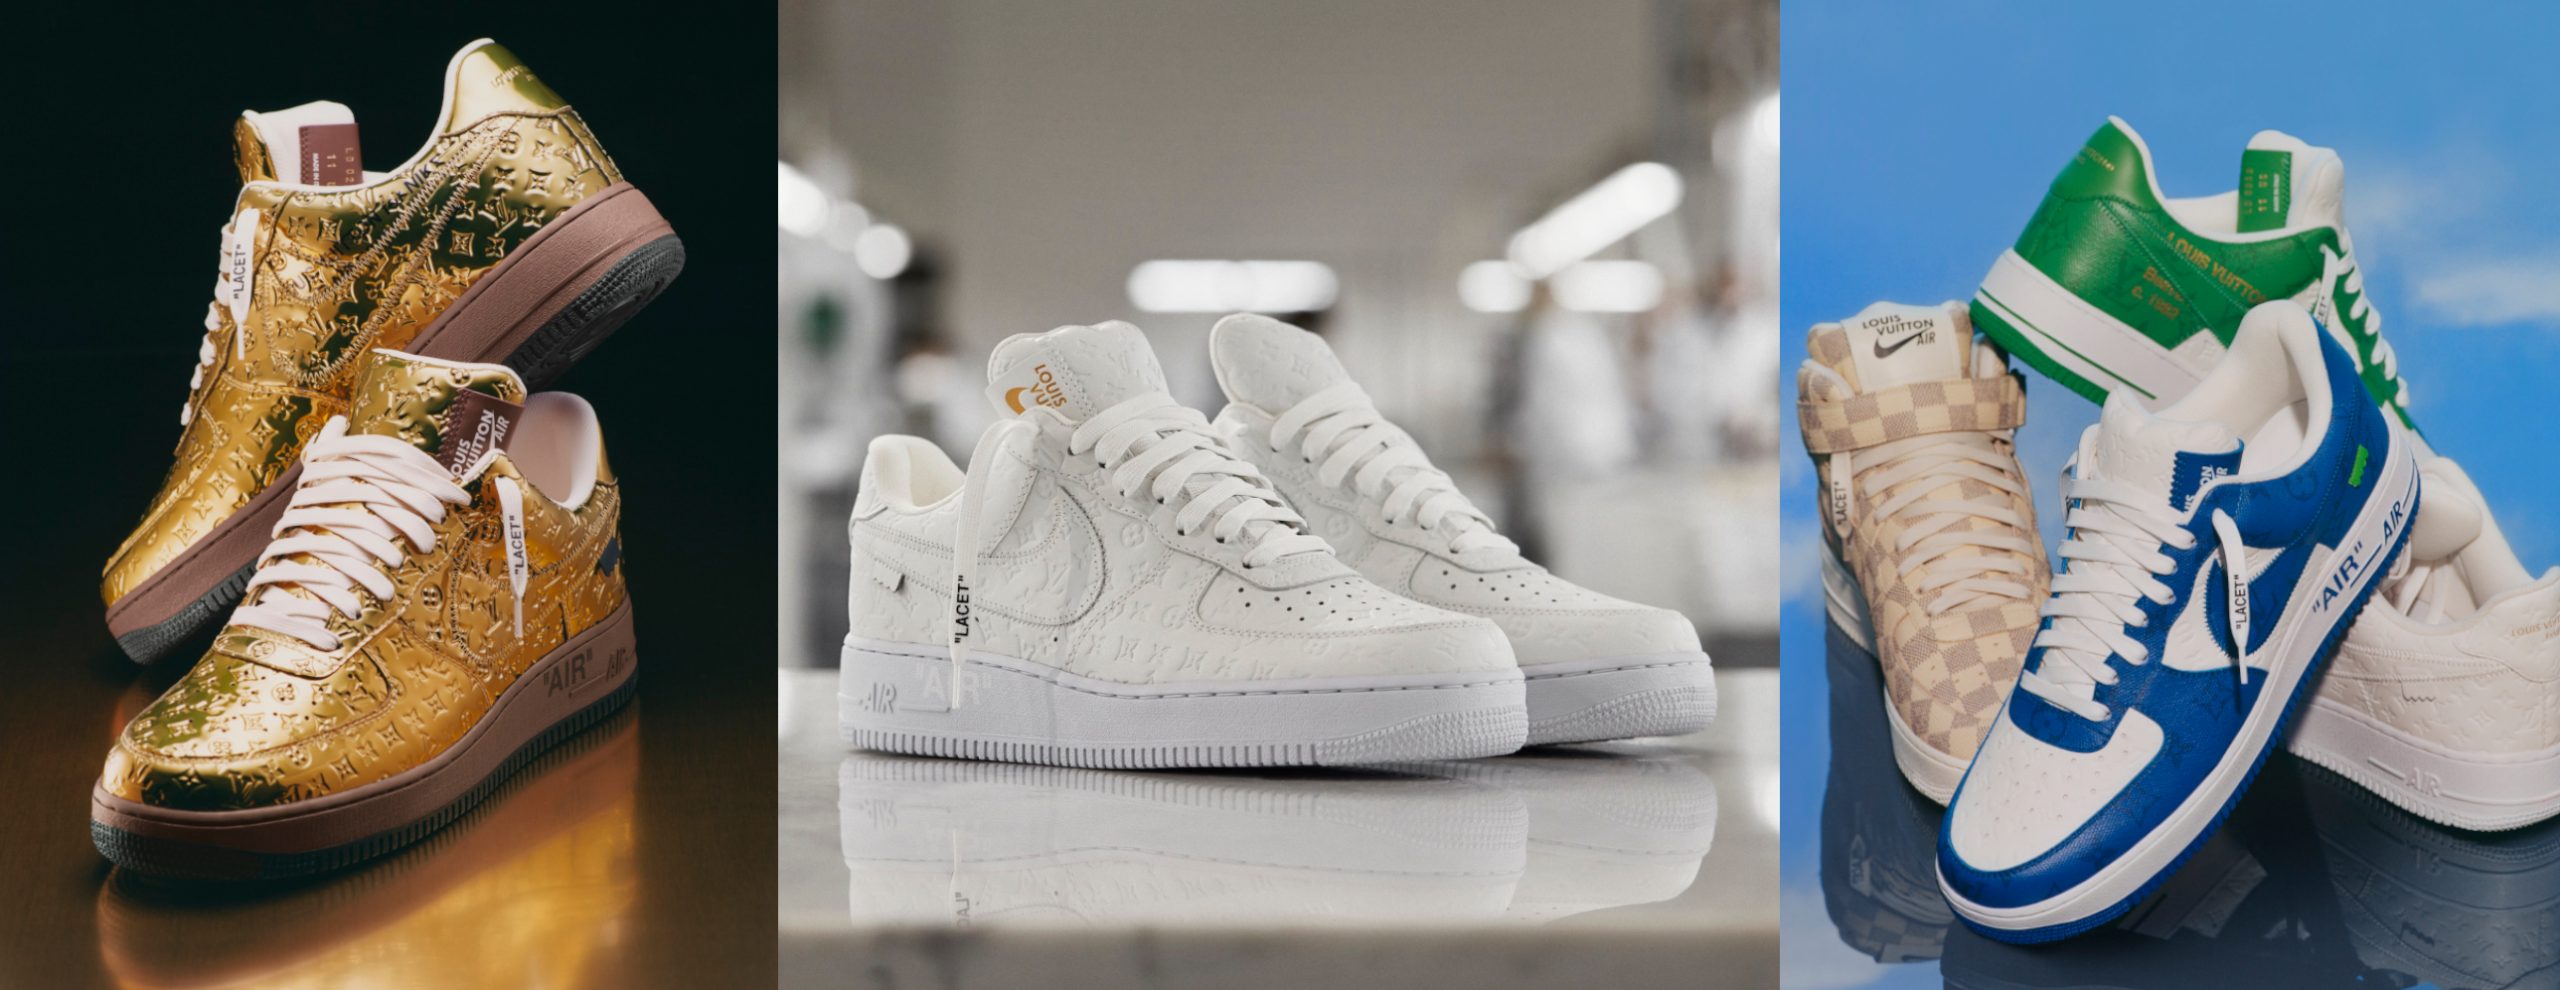 9 of Virgil Abloh's Louis Vuitton x Nike Air Force 1 Sneakers Will